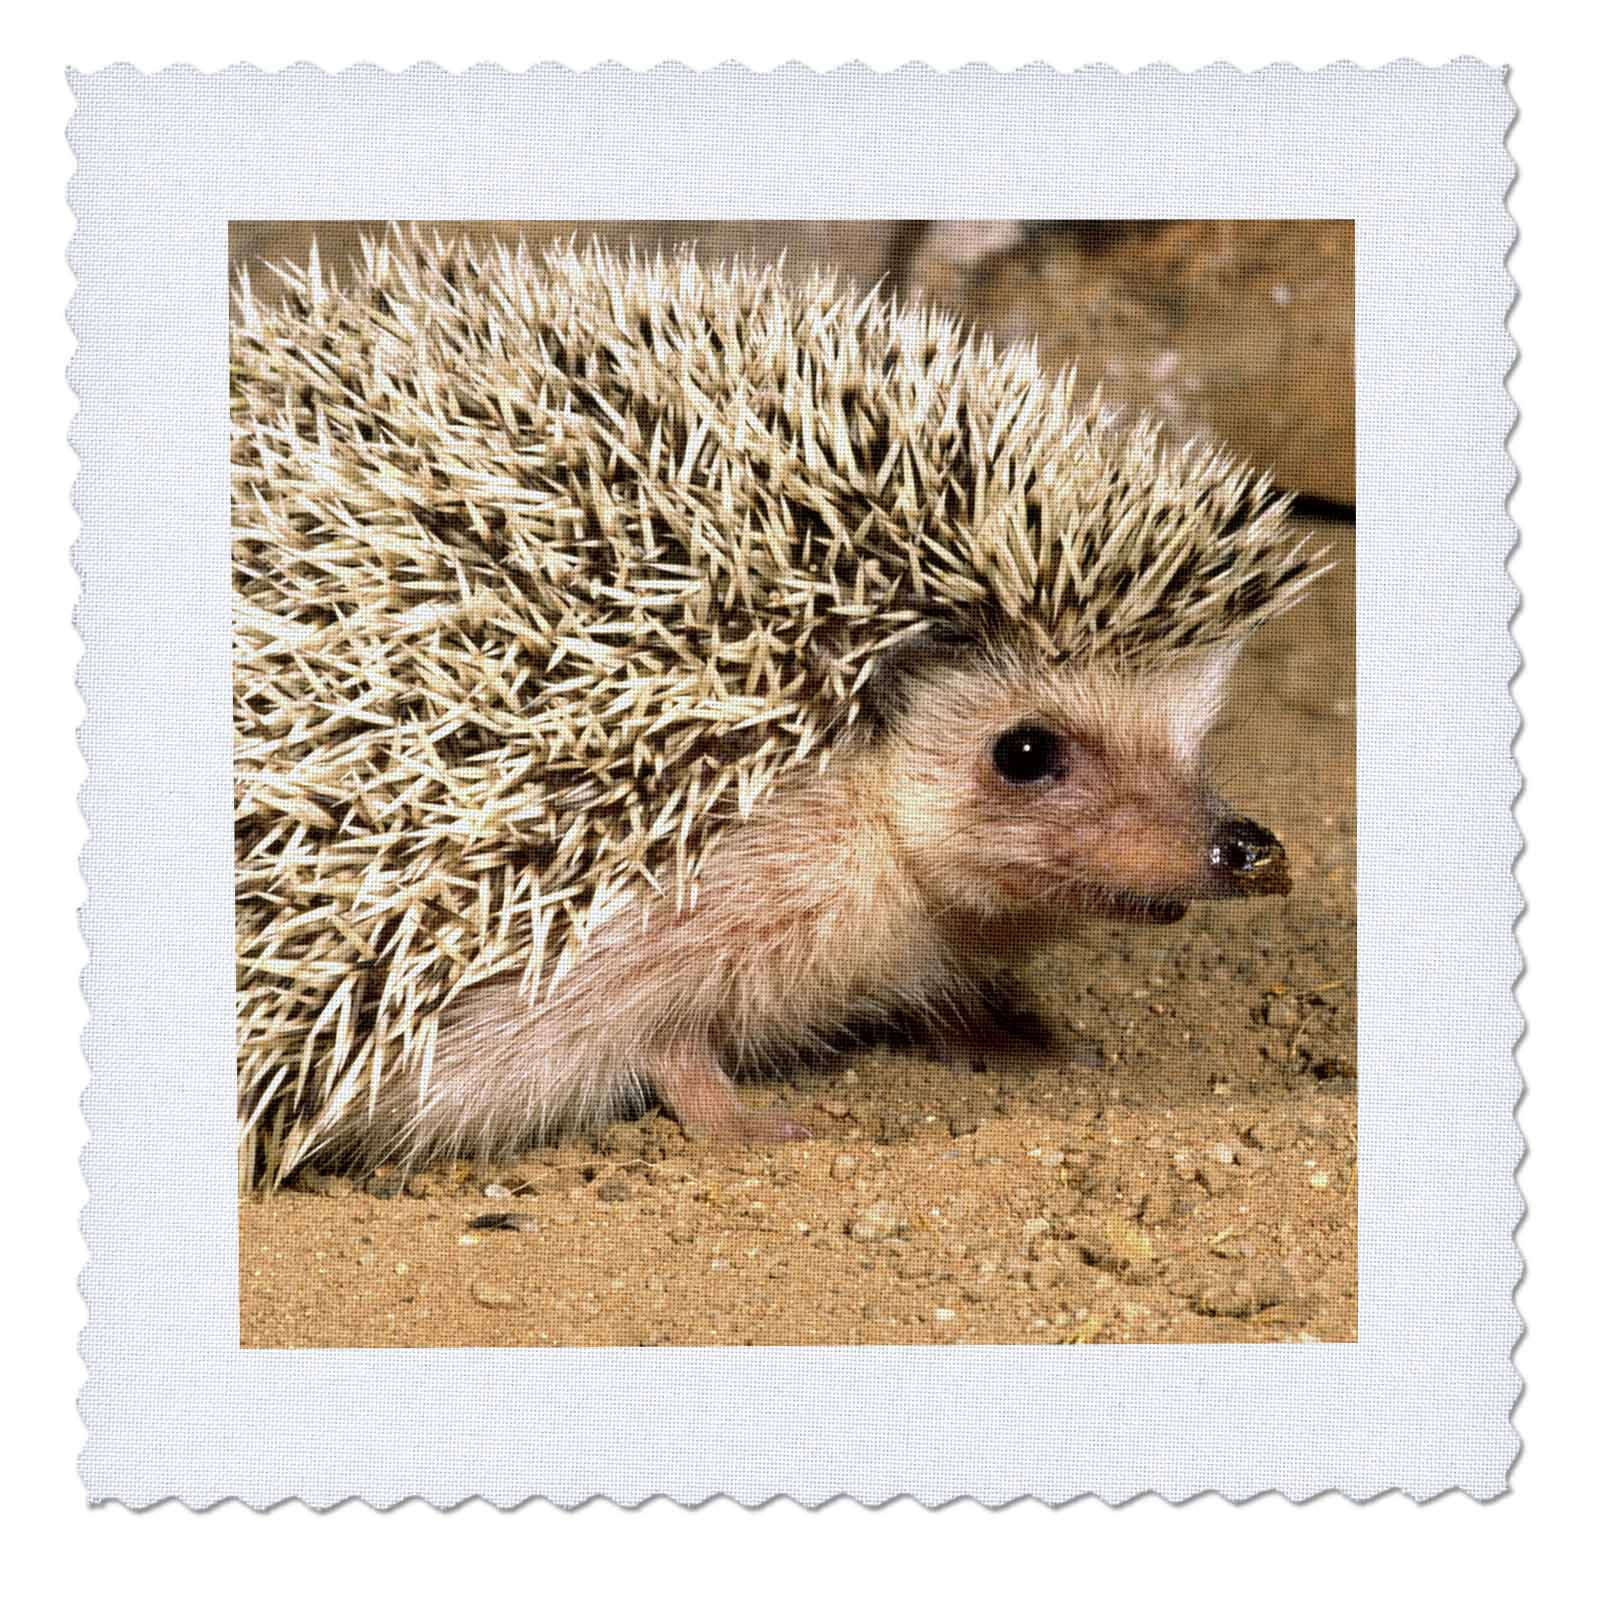 Native to Africa NA02 DNO0400 David Northcott Double Toggle Switch 3dRose lsp_83937_2 African Hedgehog wildlife 